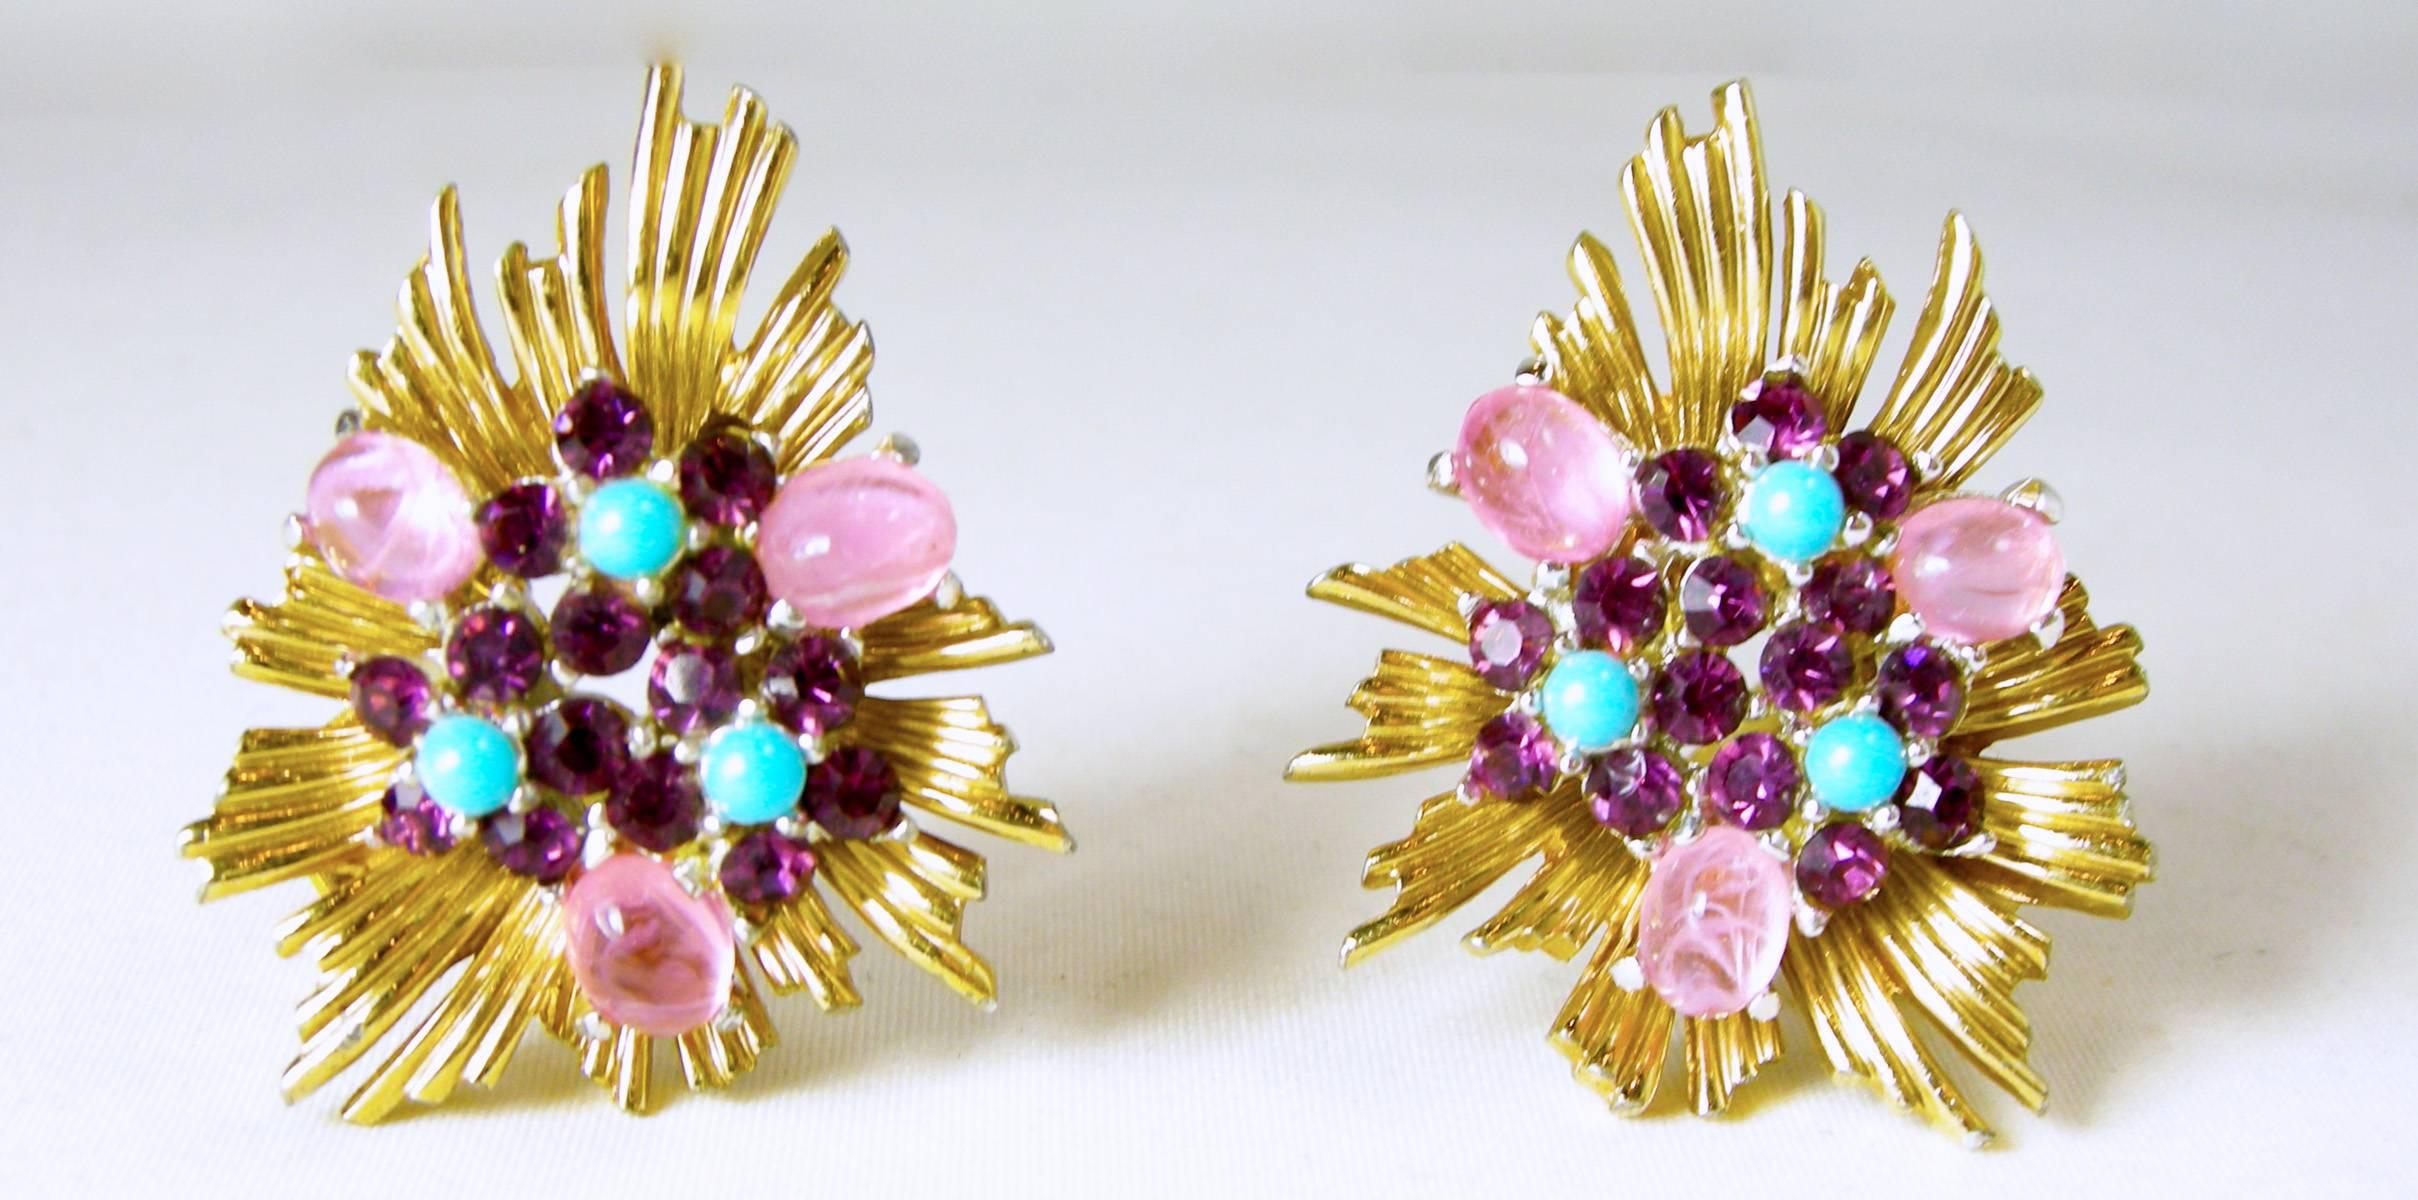 These signed “Boucher” spray earrings consist of pink art glass with purple rhinestones and turquoise cabochons that are set in a gold tone setting. They measure 1-1/2” x 1” and are in excellent condition.